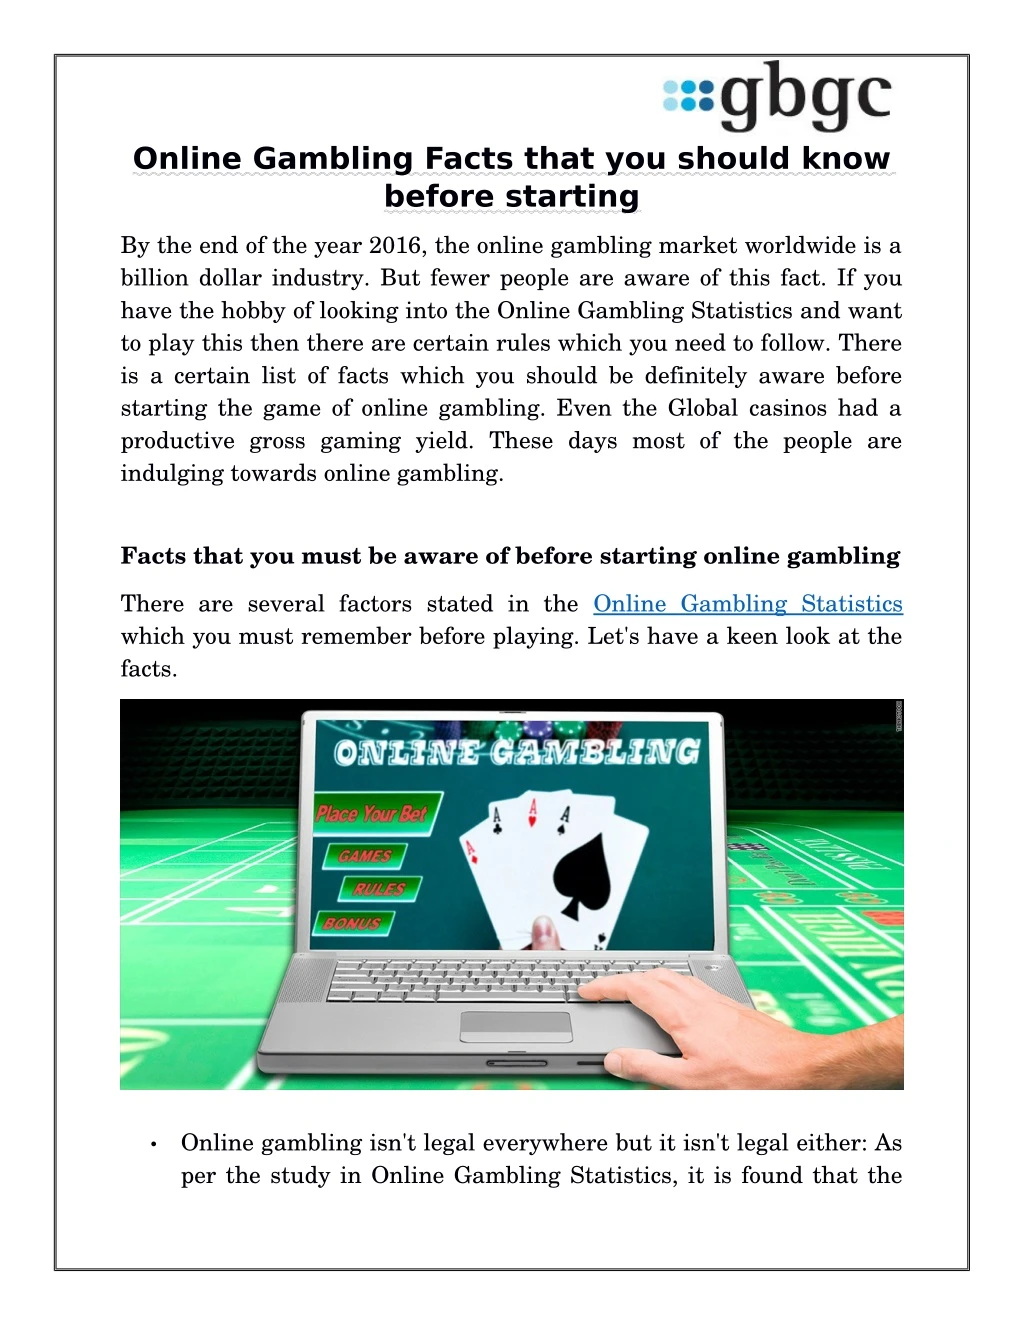 online gambling facts that you should know before